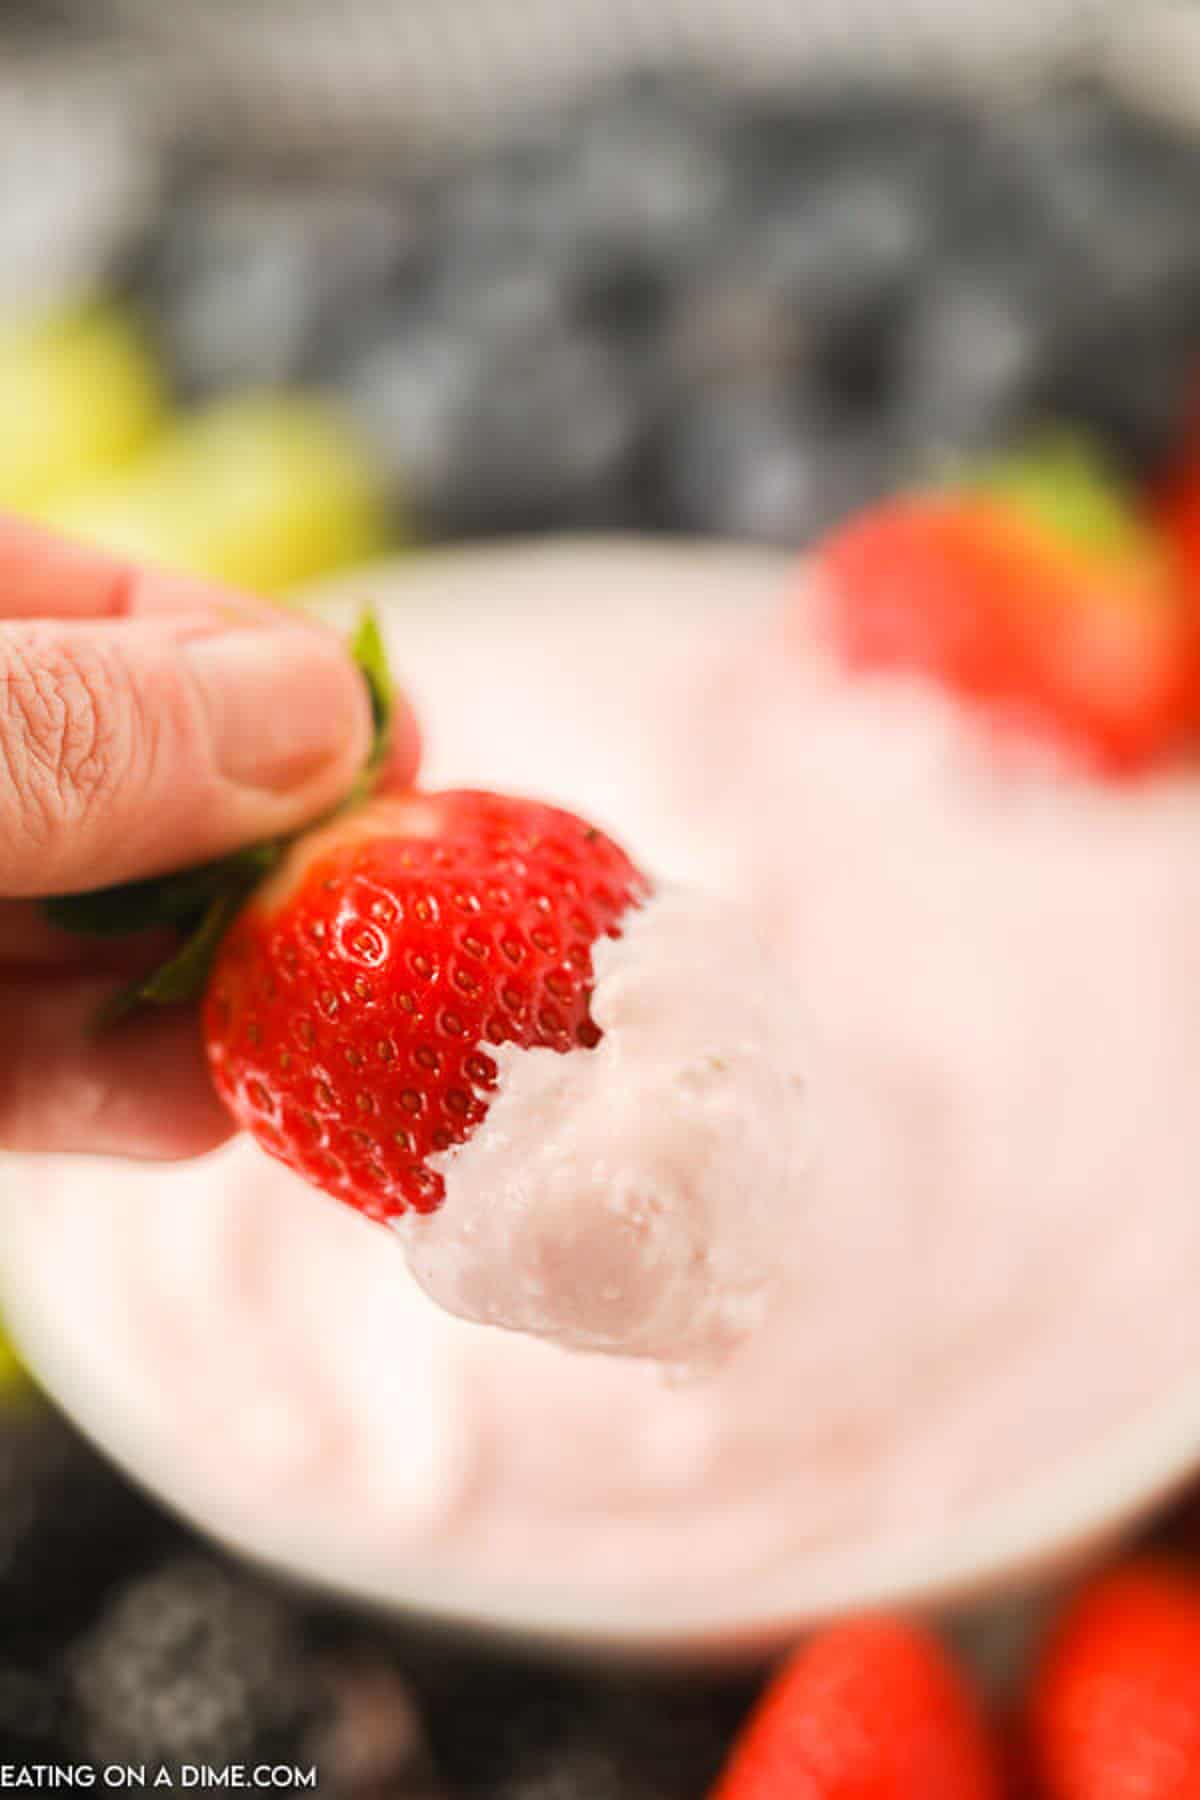 A strawberry being dipped into strawberry fruit dip